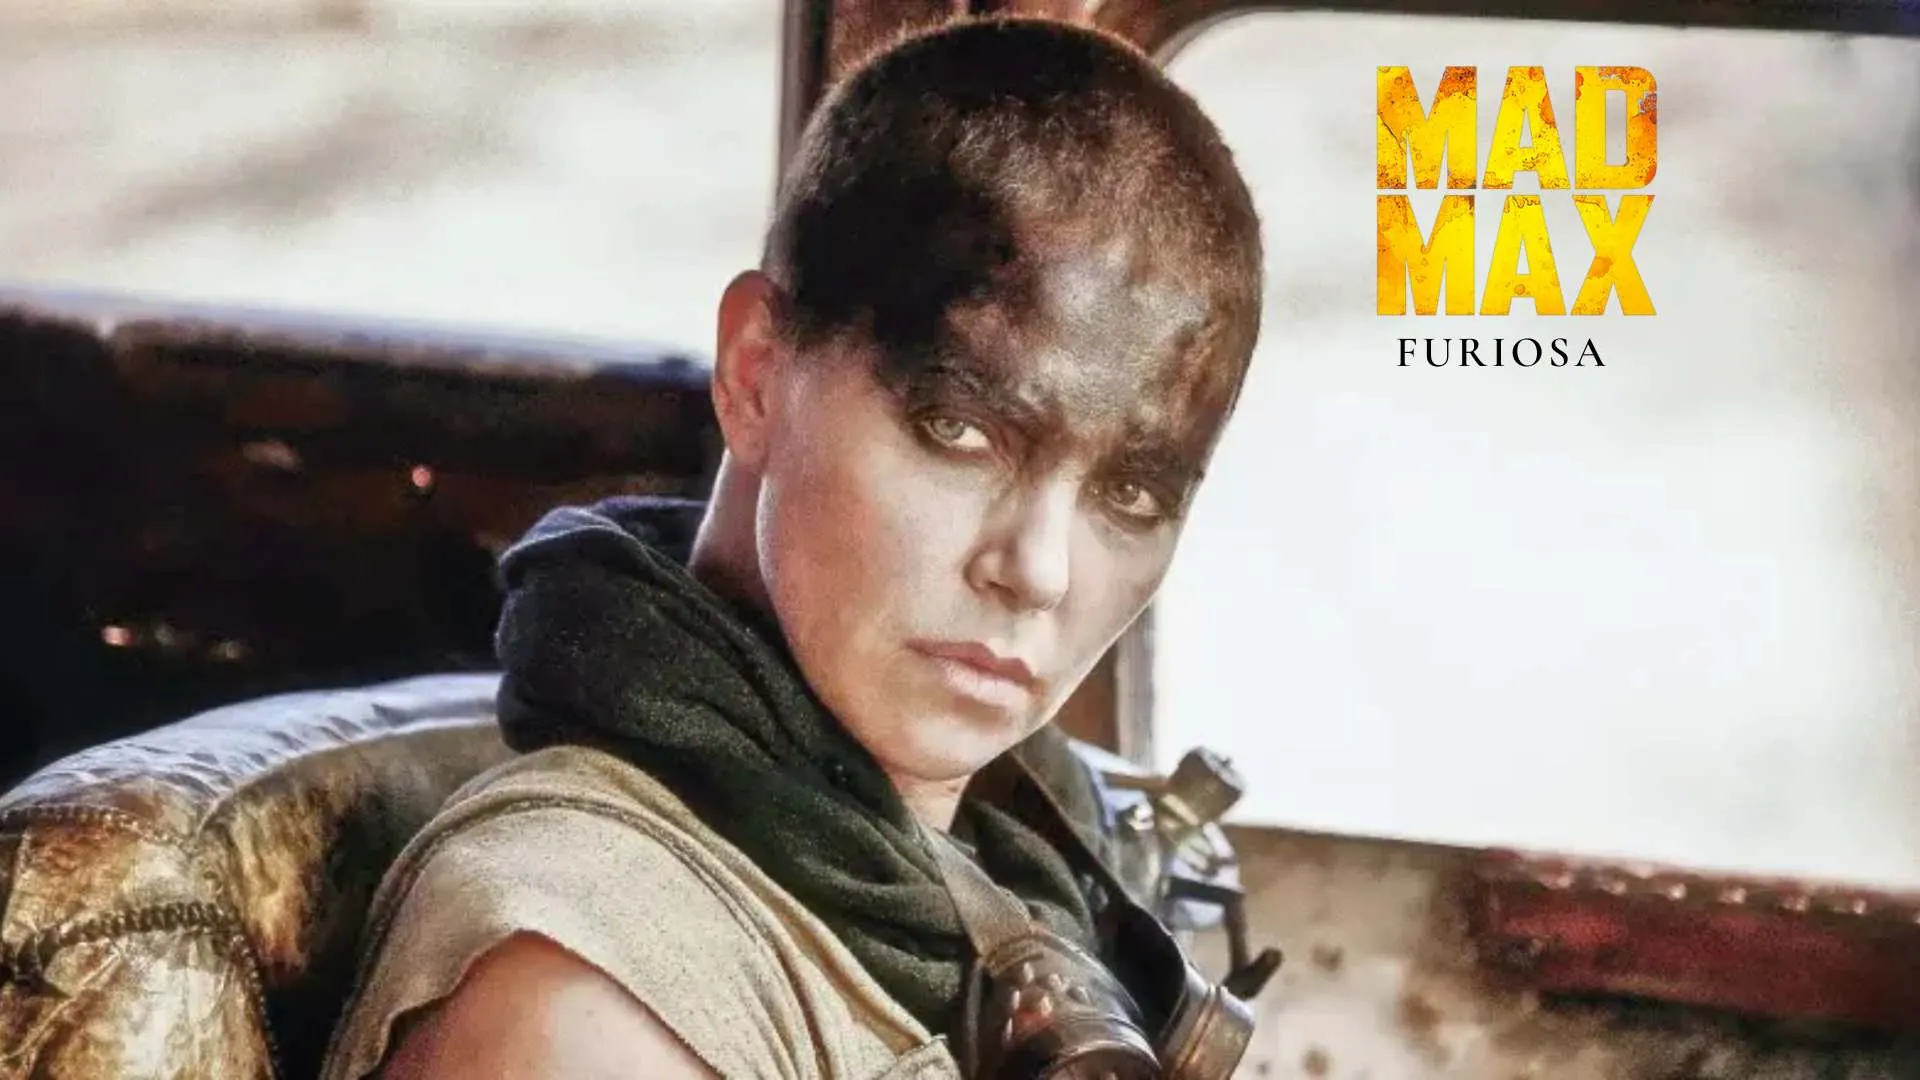 Everything you need to know about 'Mad Max' franchise's fifth film 'Furiosa': Release Date, Cast, Plot